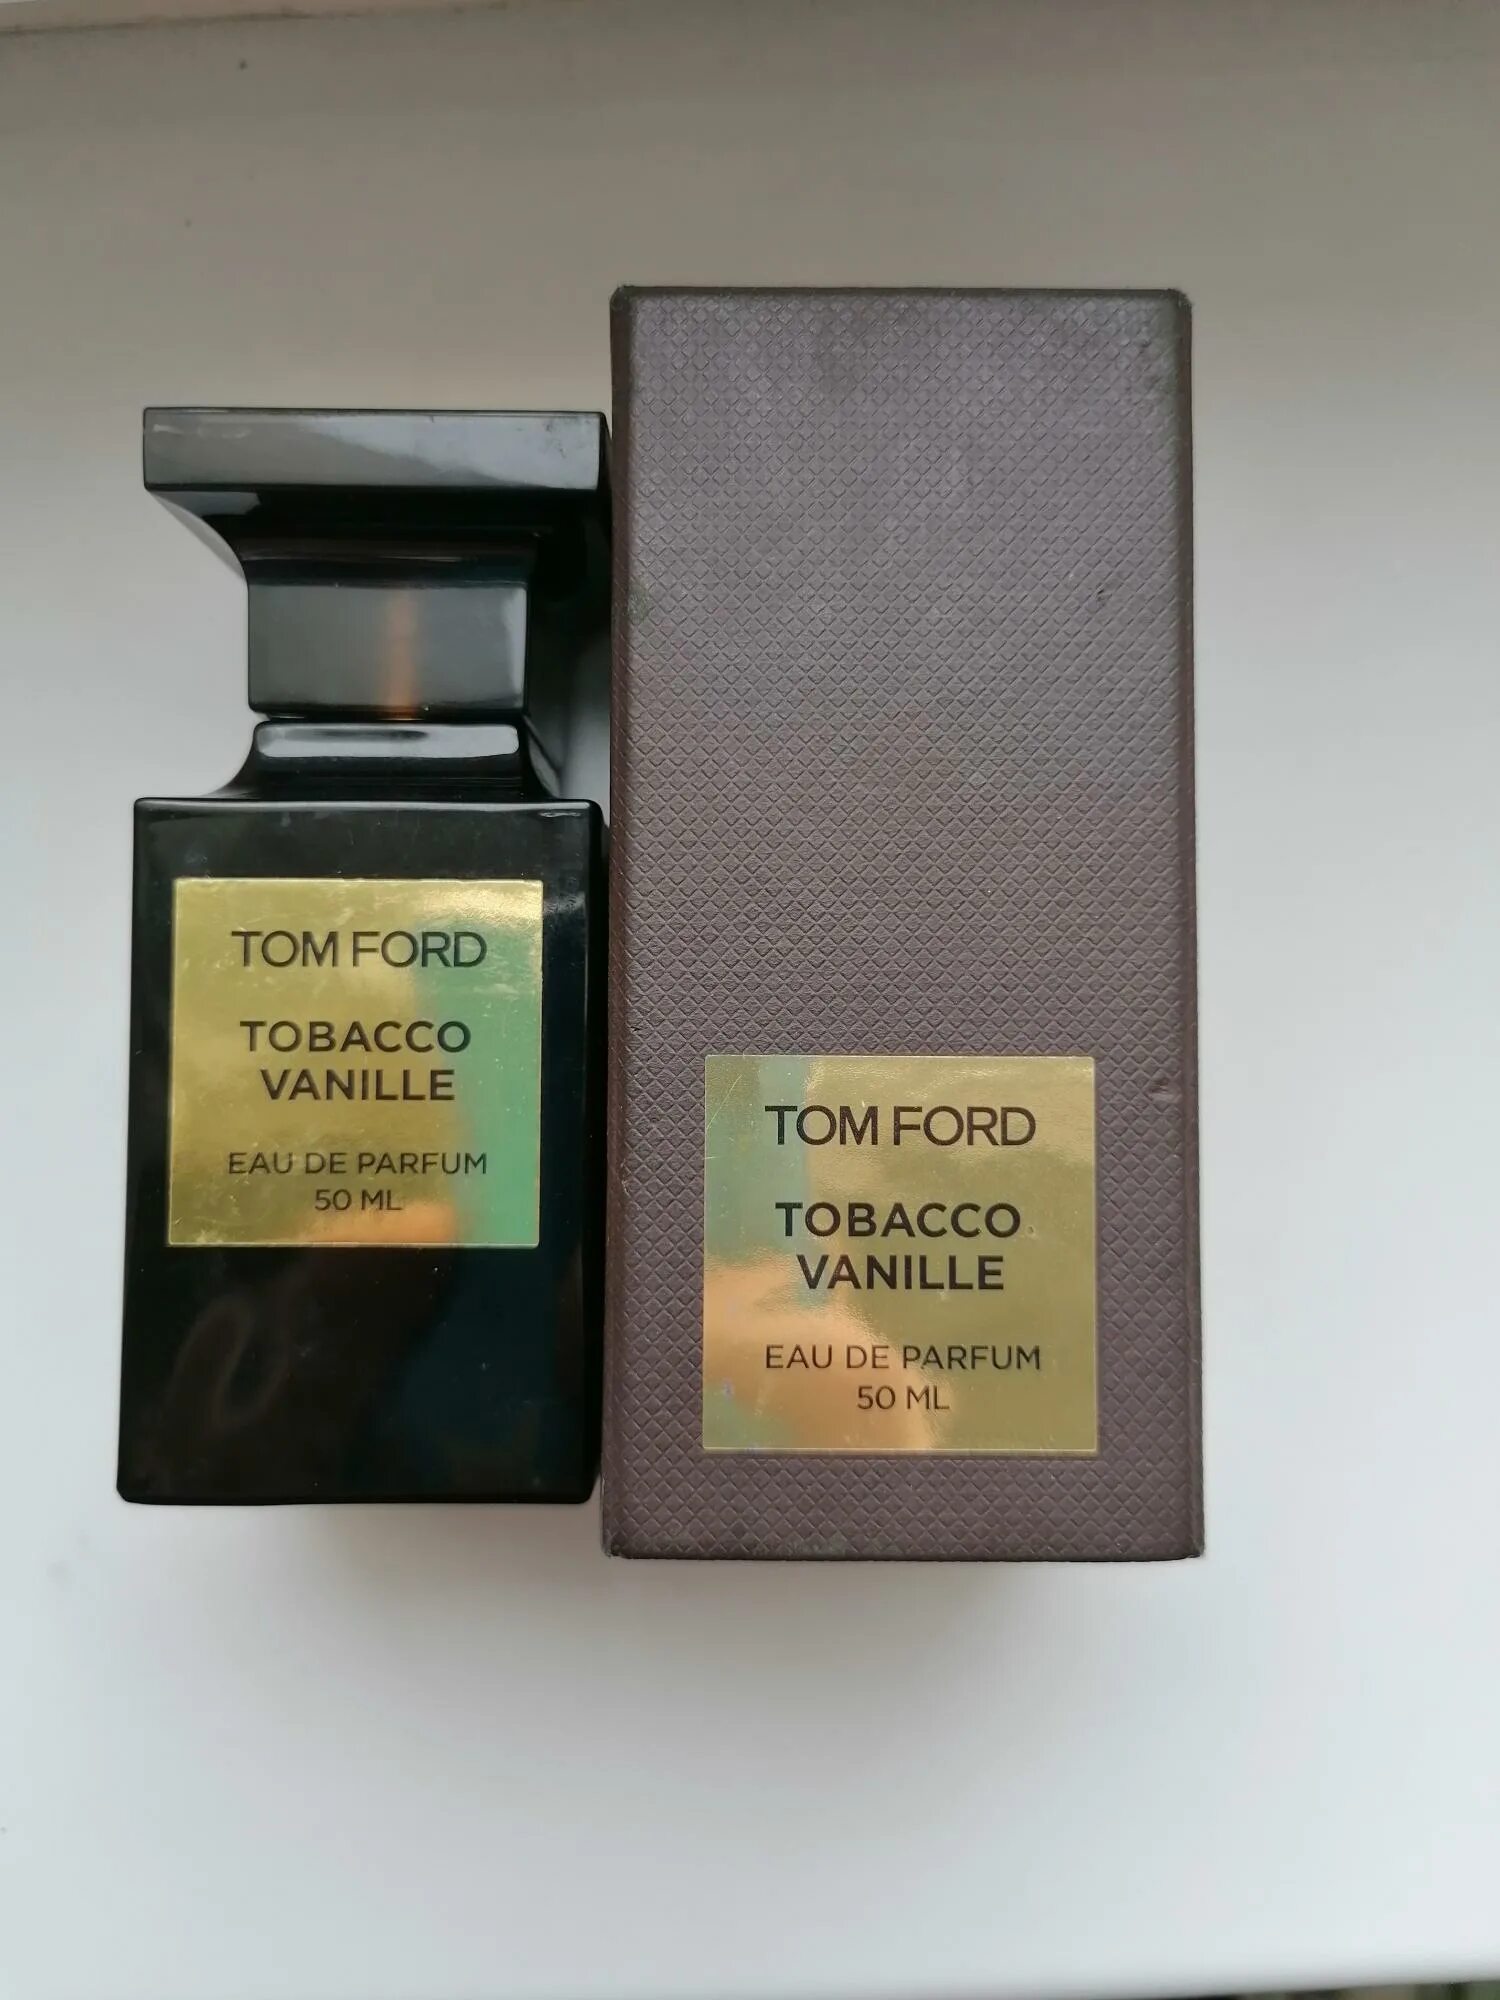 Tom Ford Tobacco Vanille 50ml. Tobacco Vanille Tom Ford 50. Том Форд табако ваниль 25 мл. Том Форд табако ваниль оригинал.